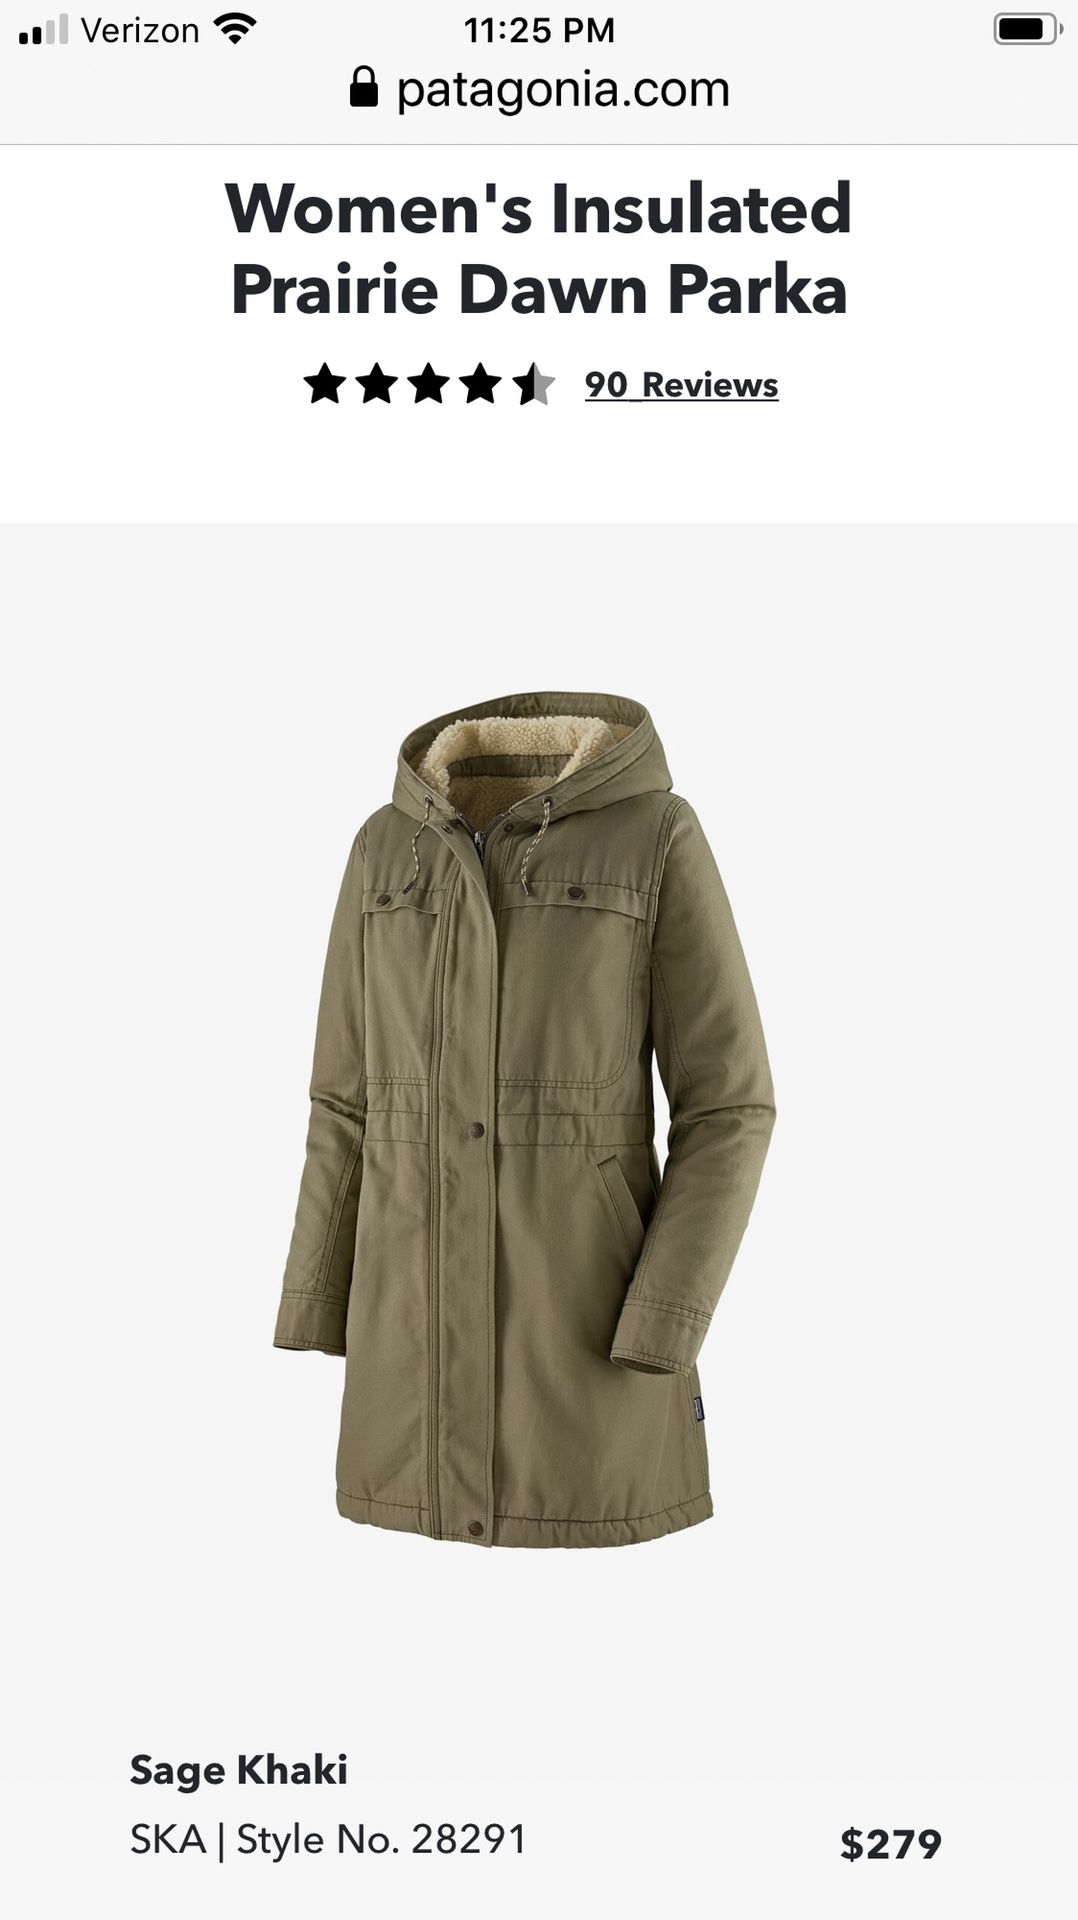 Patagonia XL Women’s Parka $100 For $279 Brand New Jet